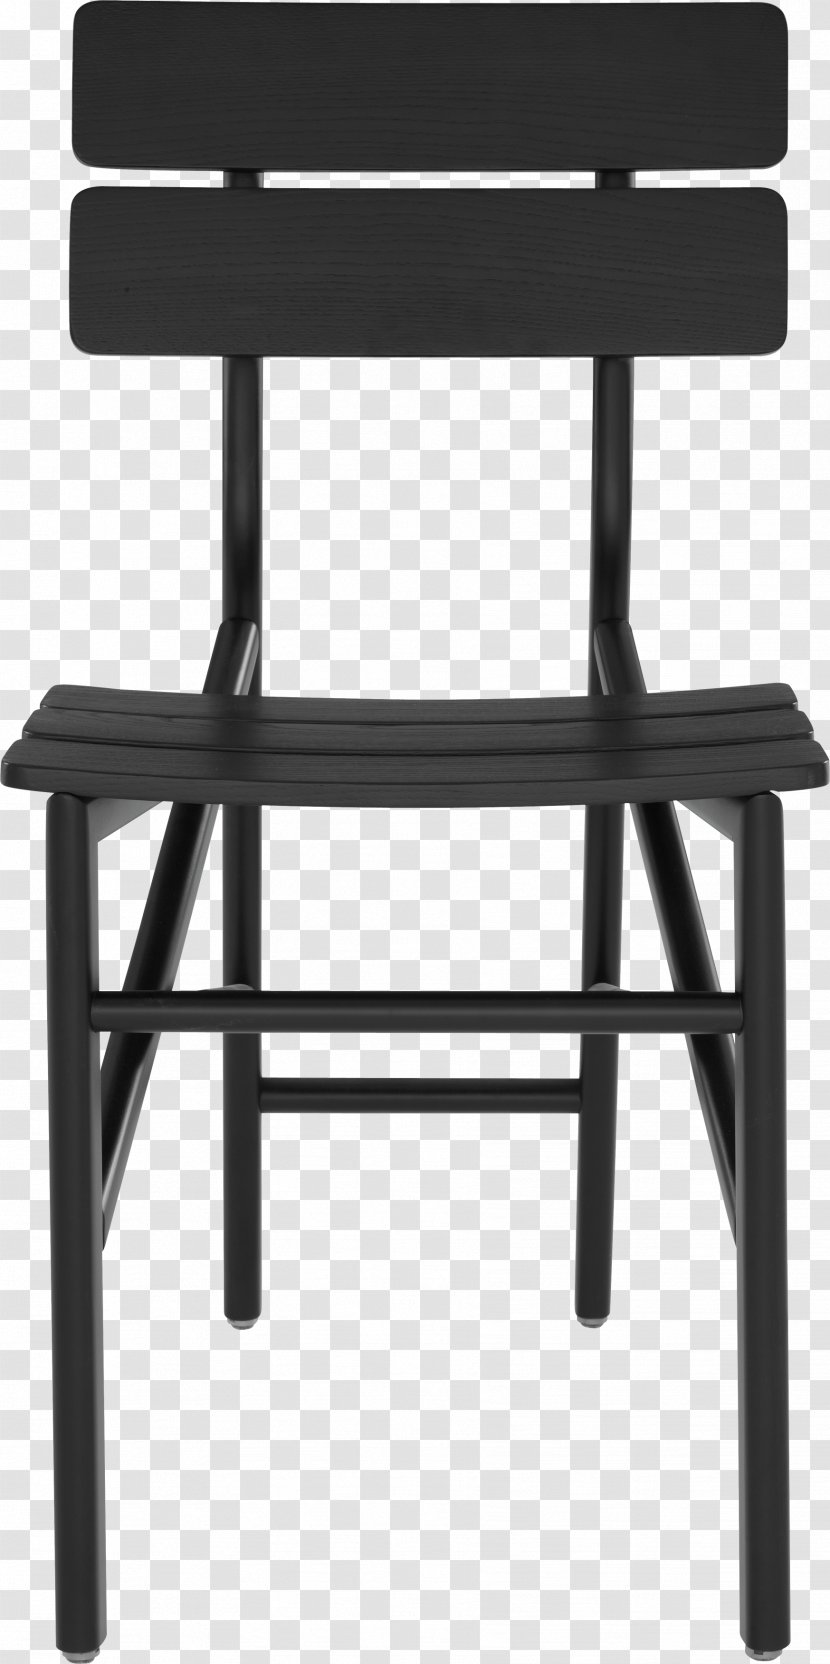 Table Chair Furniture - Product Design - Image Transparent PNG